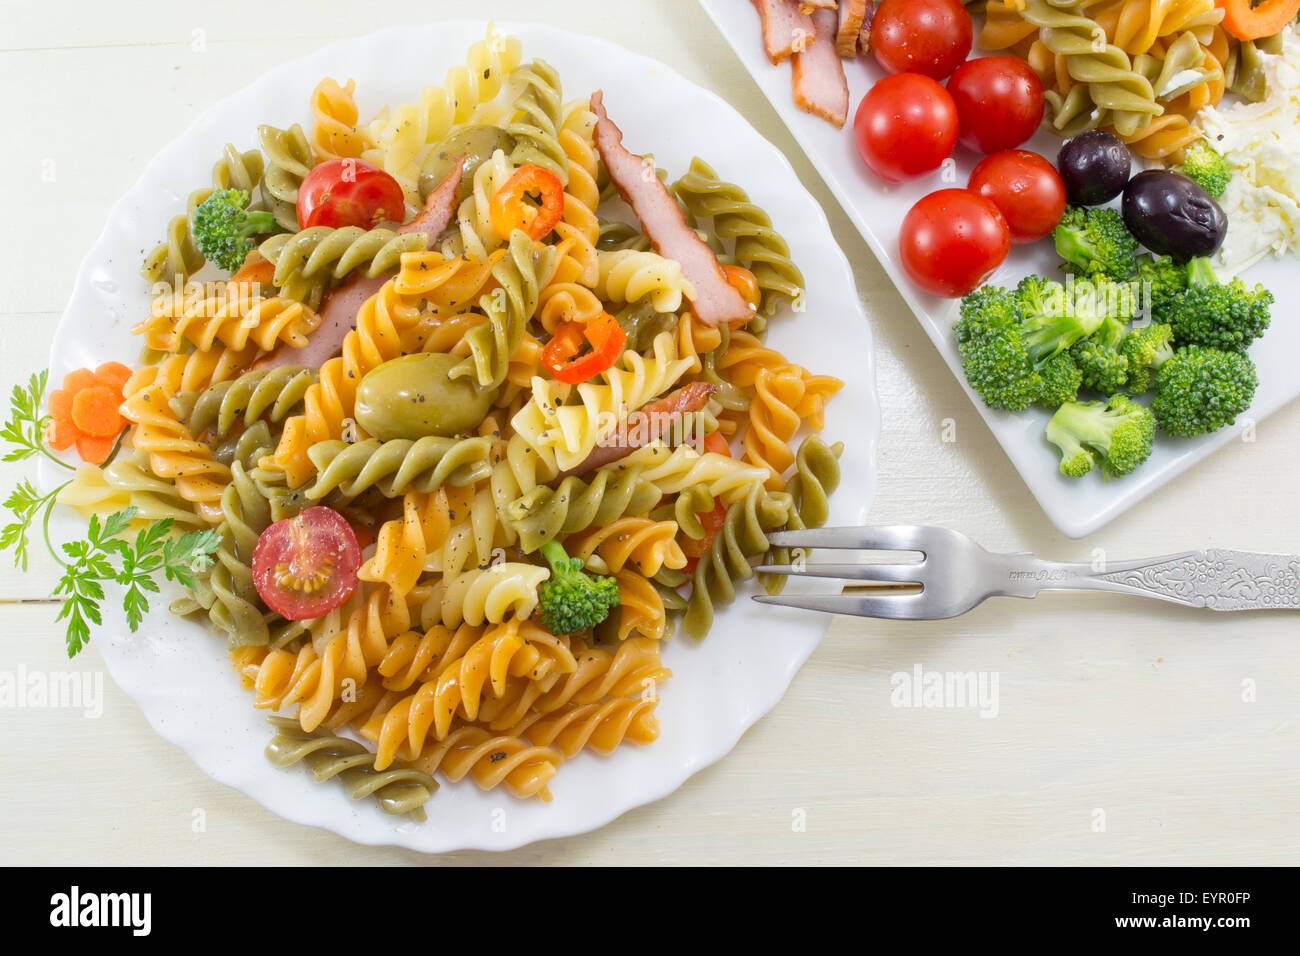 Pasta meal cooked with vegetables with fresh vegetables served in white dishes Stock Photo